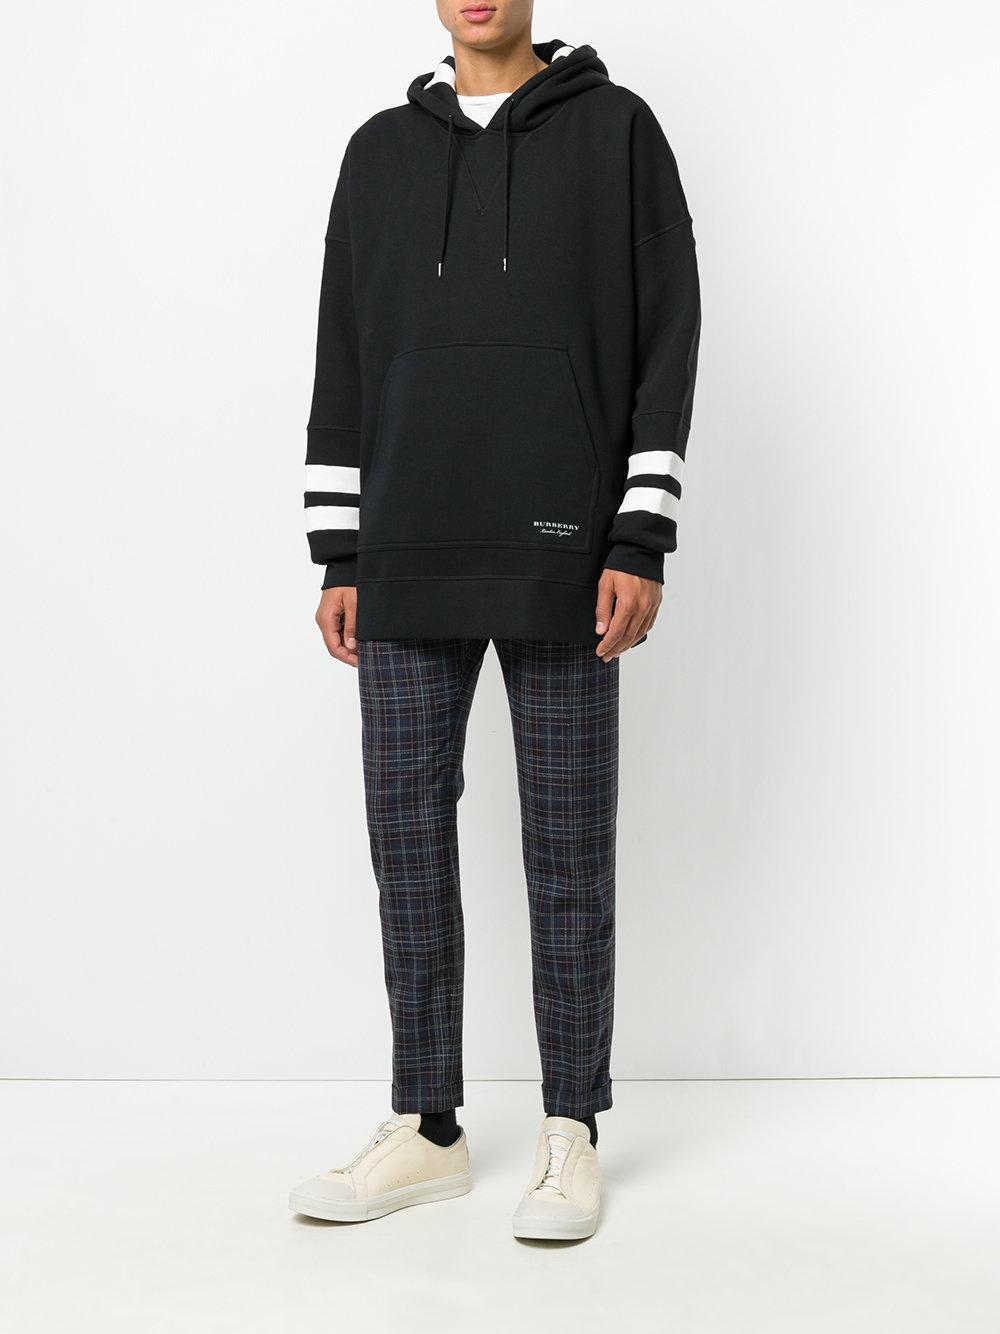 Lyst - Burberry Classic Hoodie in Black for Men